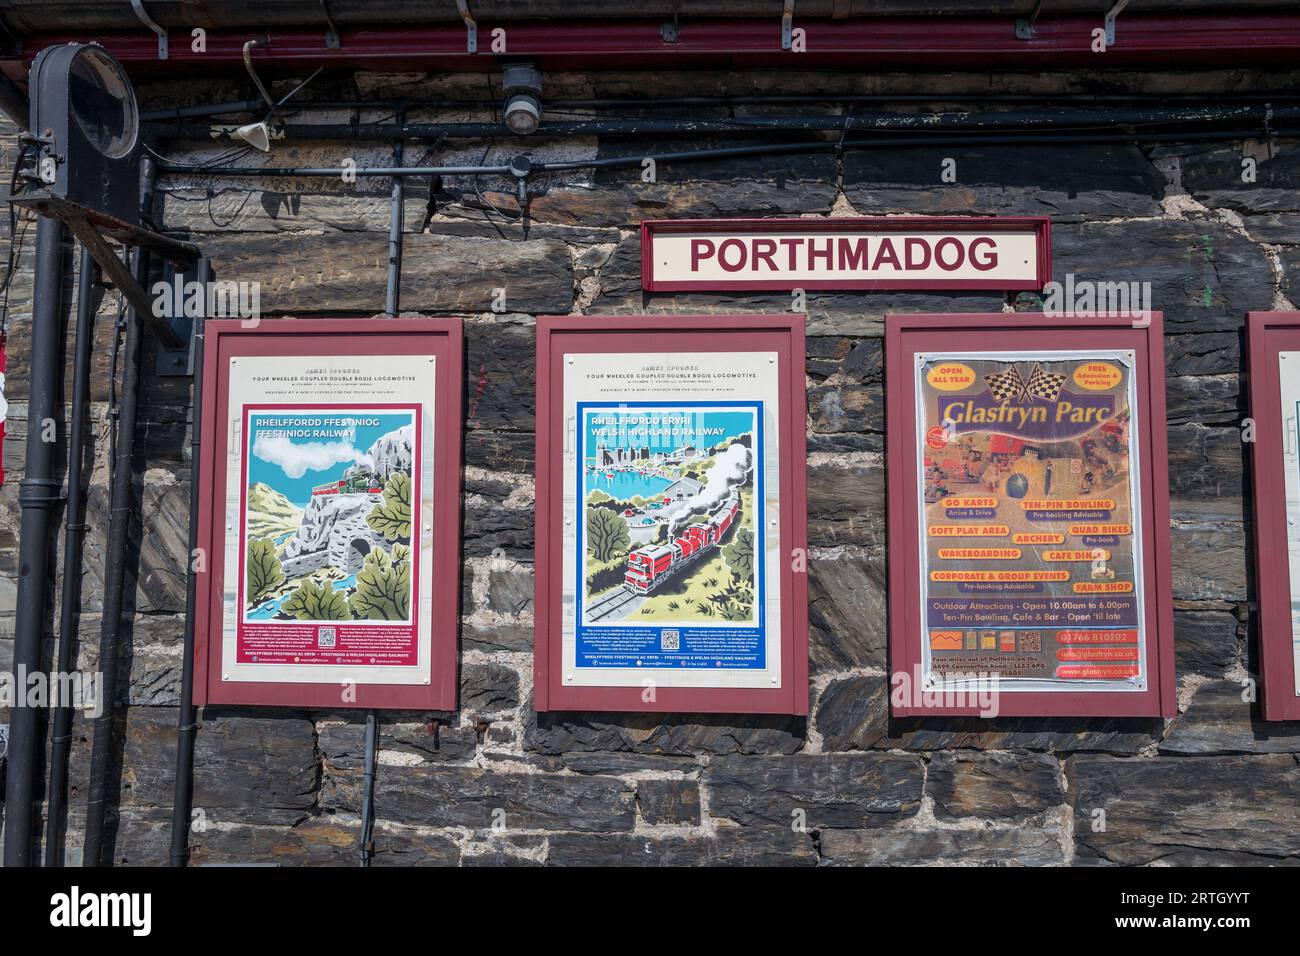 Framed advertisment boards for the Ffestiniog and Welsh Highland railway train trips at the Porthmadoc railway station. Stock Photo